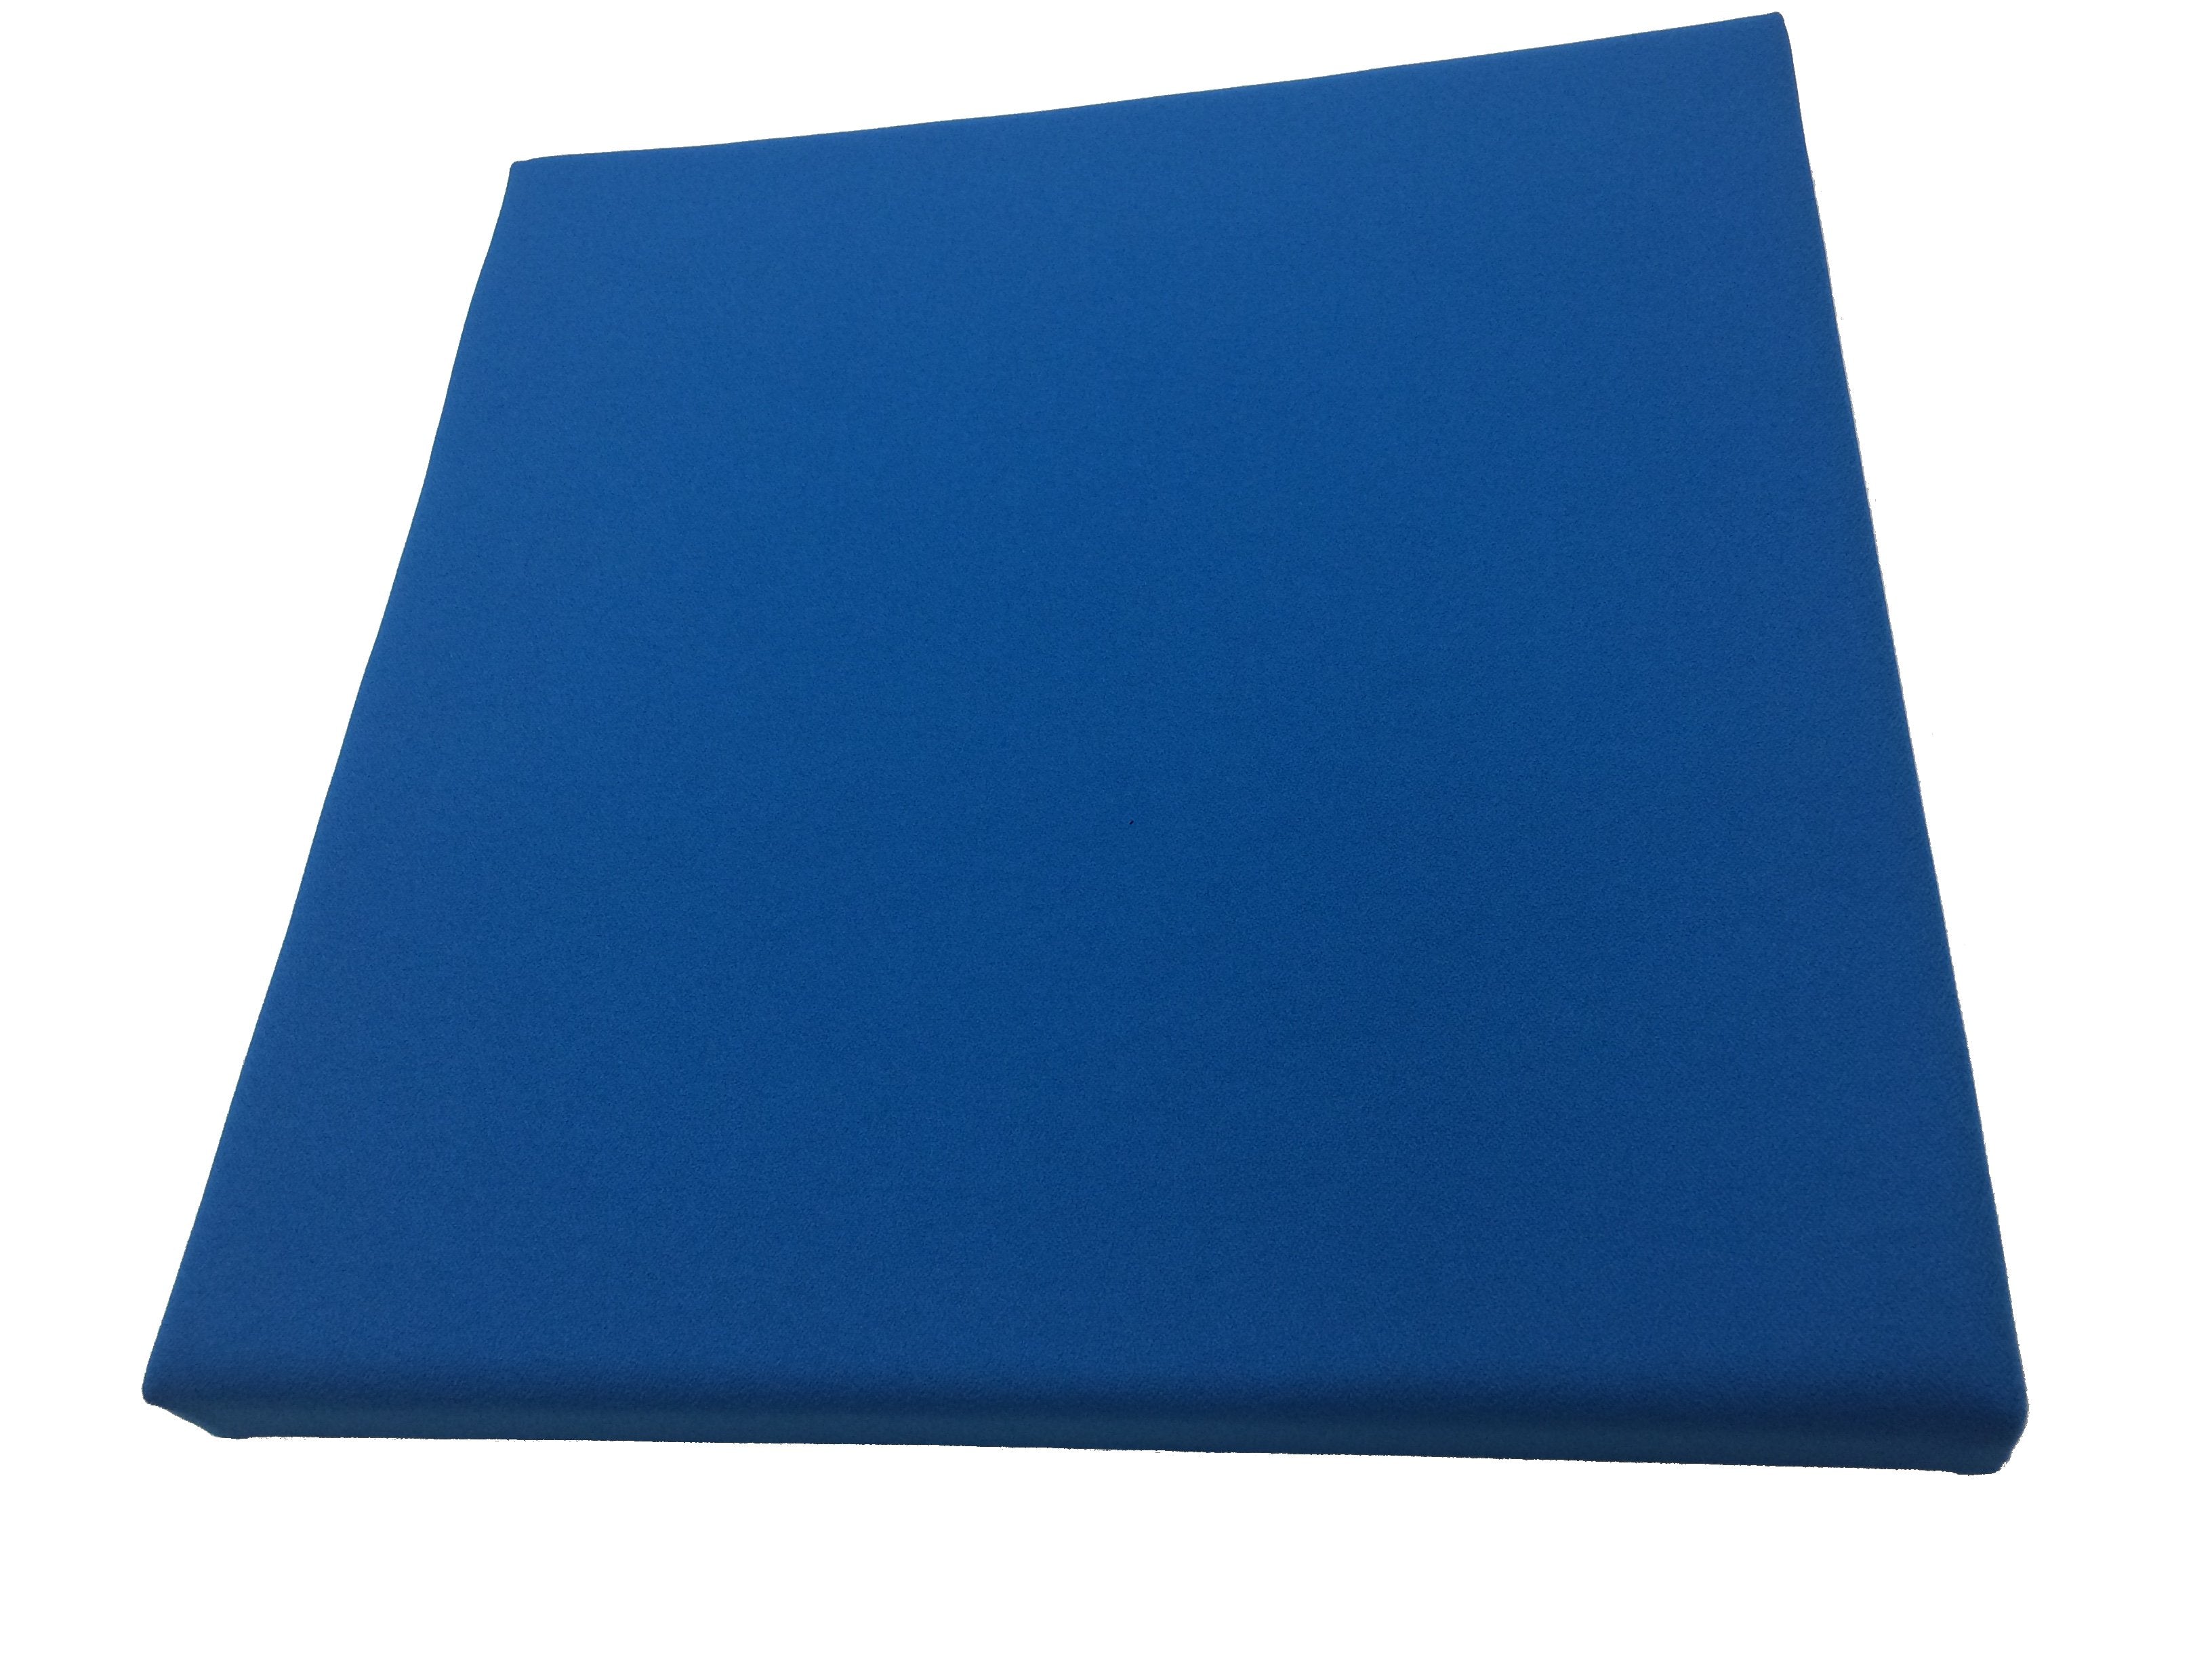 1" SoundControl Ceiling Suspended Acoustic Panel 2ft by 2ft - Advanced Acoustics